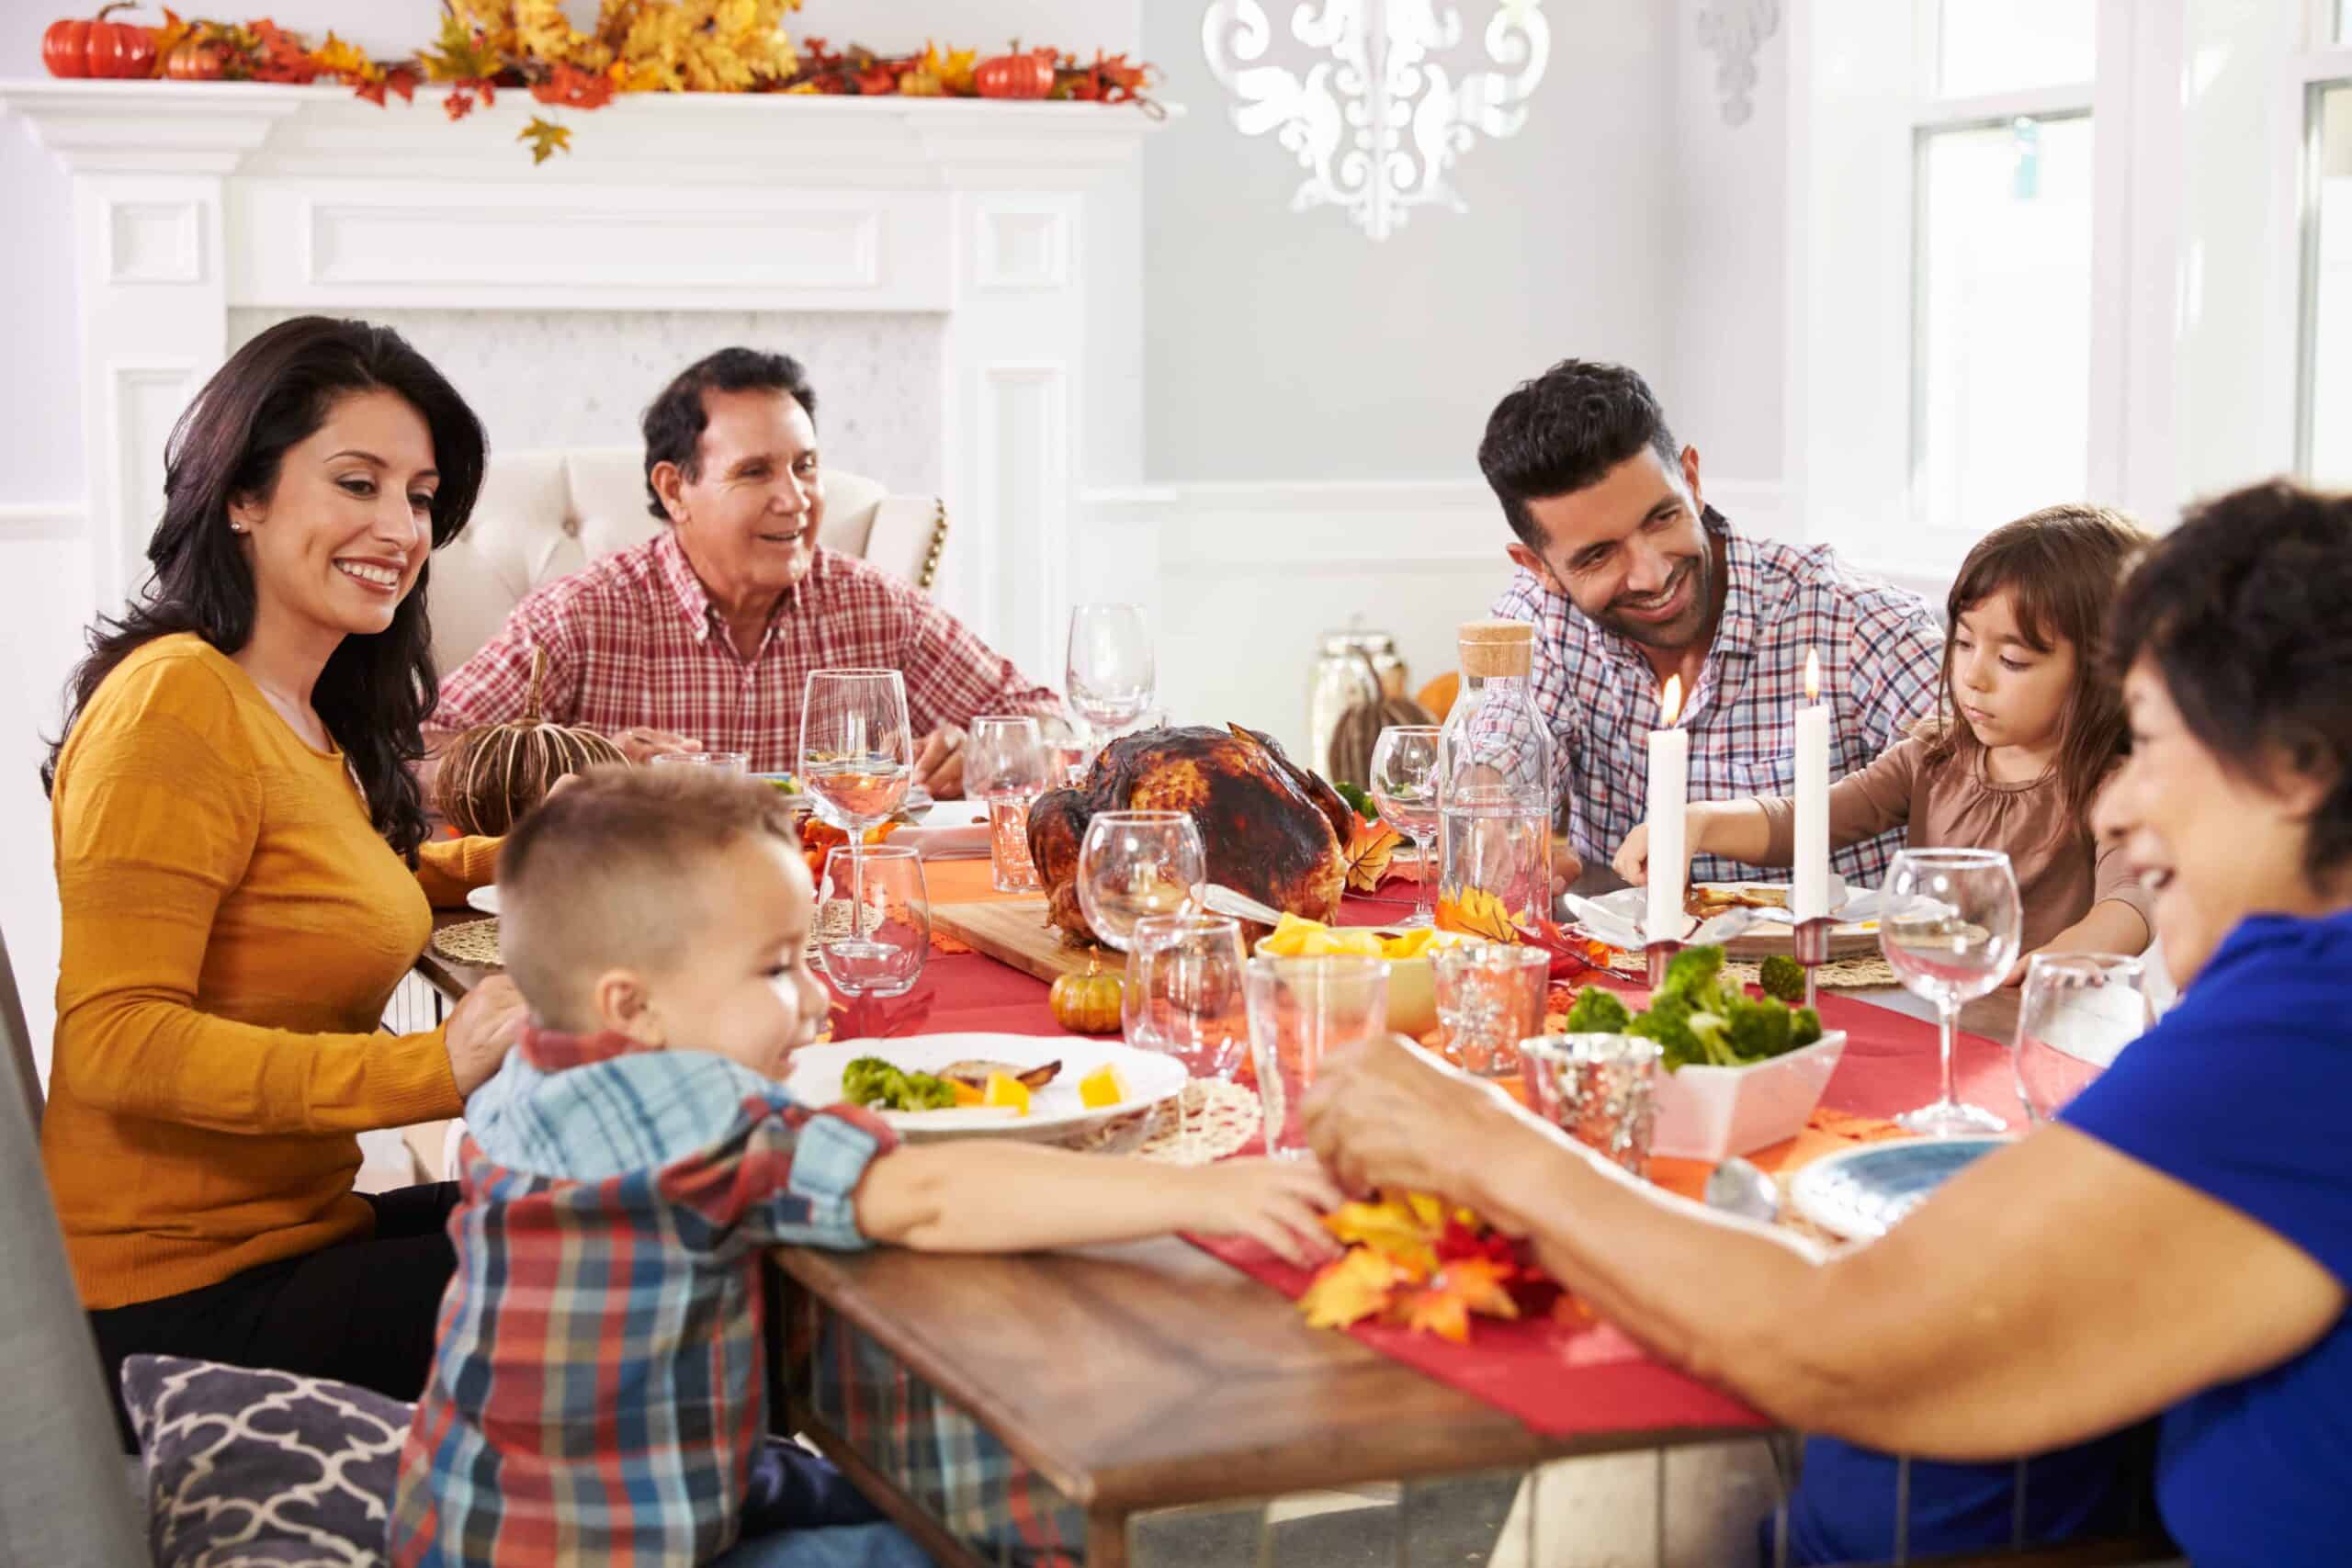 How do you show gratitude as a family? Discover how these simple gratitude tips can help you be thankful and show your thankfulness together.